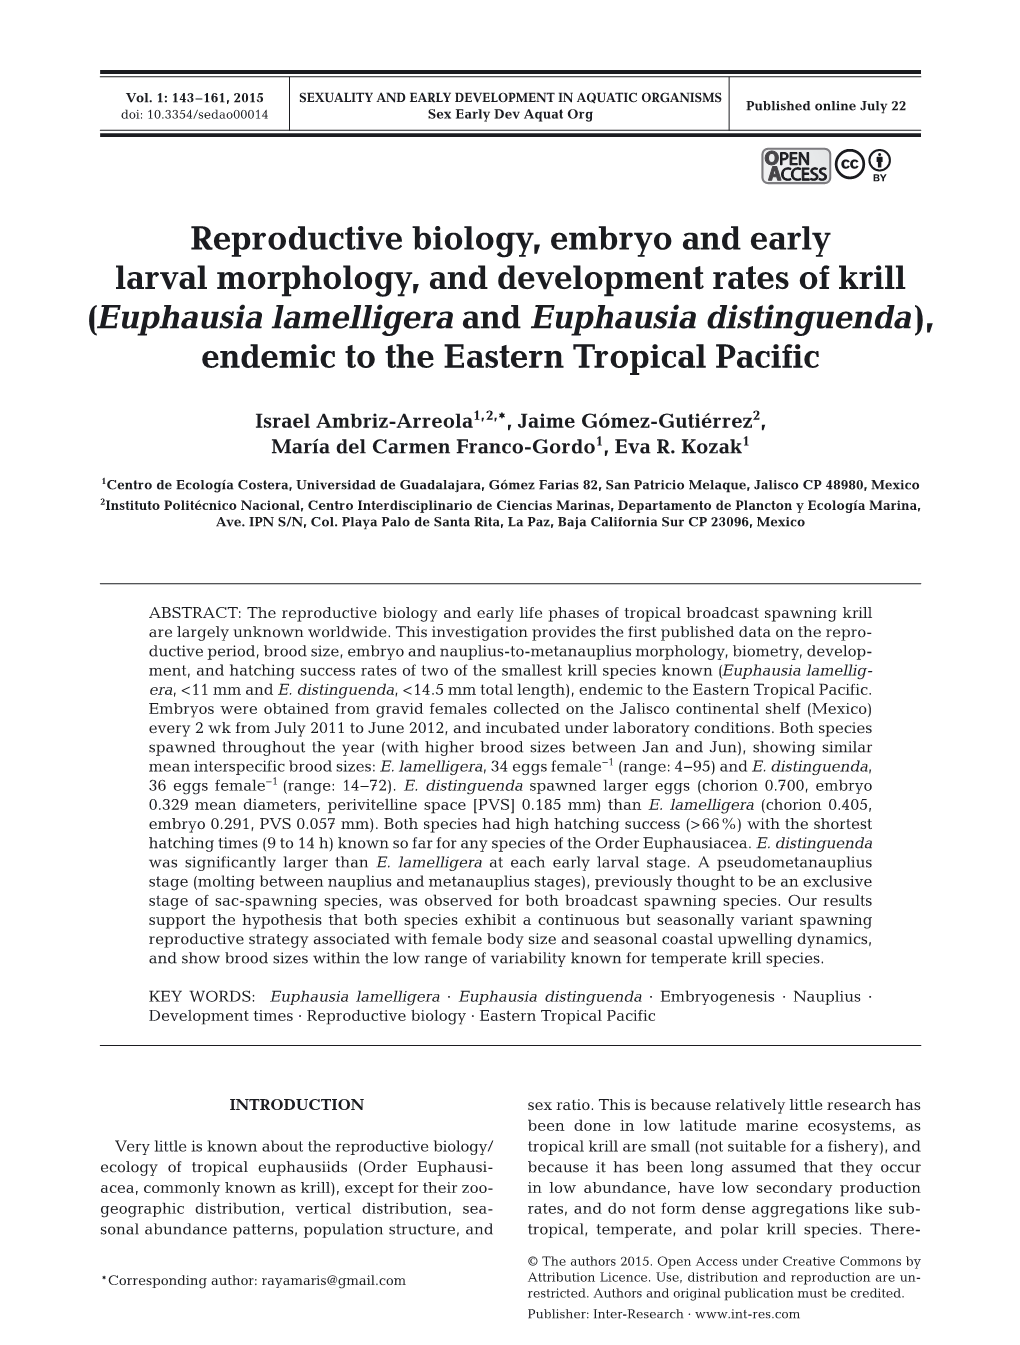 Reproductive Biology, Embryo and Early Larval Morphology, And